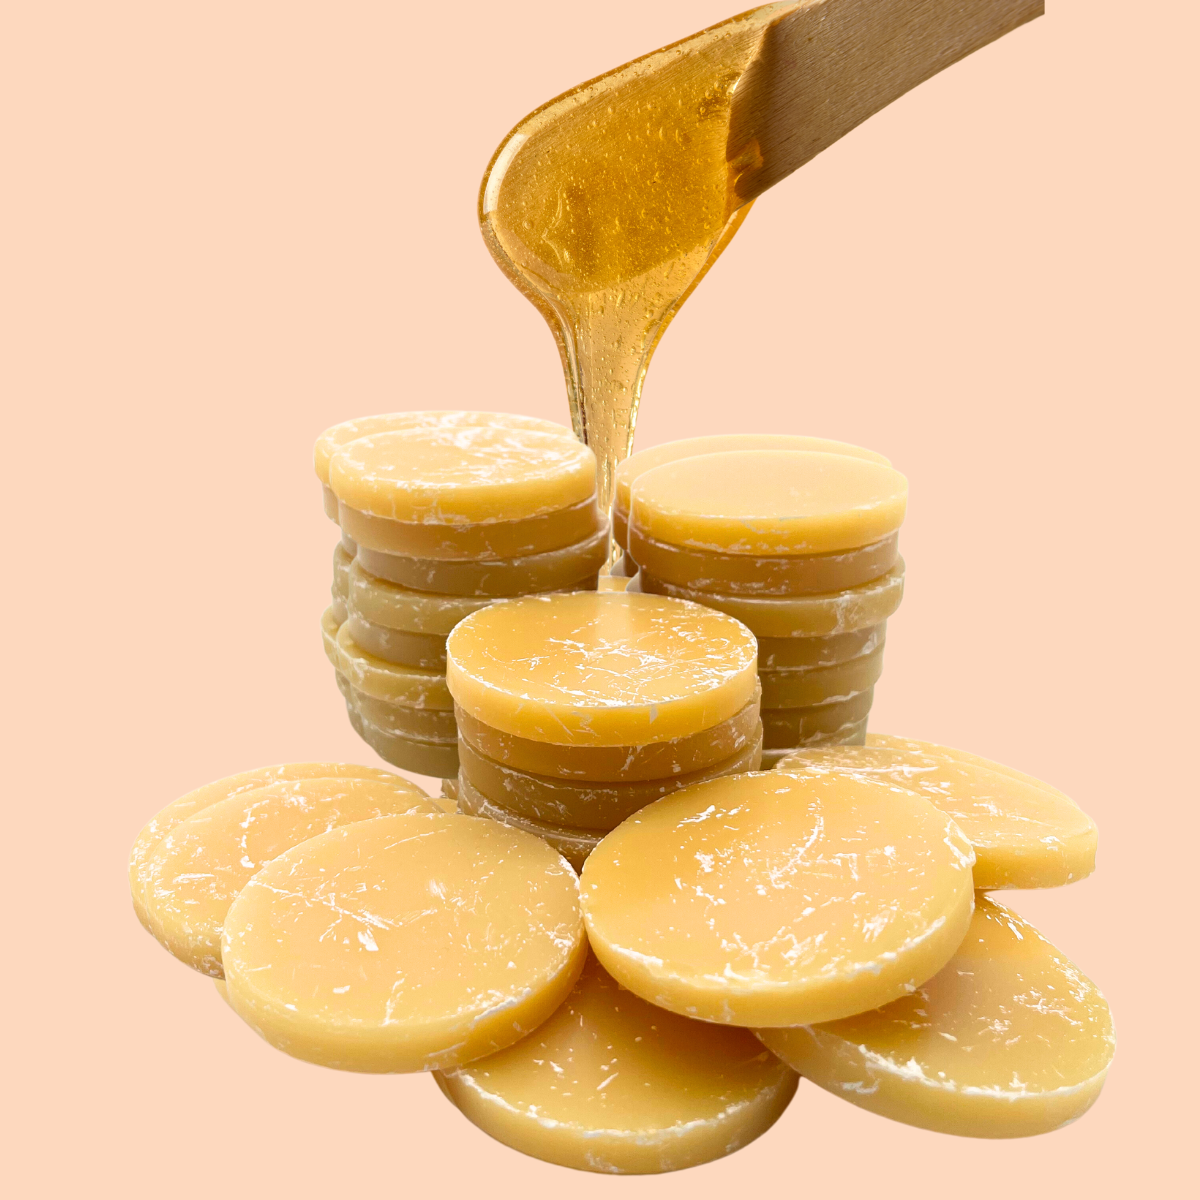 Professional honey wax discs for hair removal